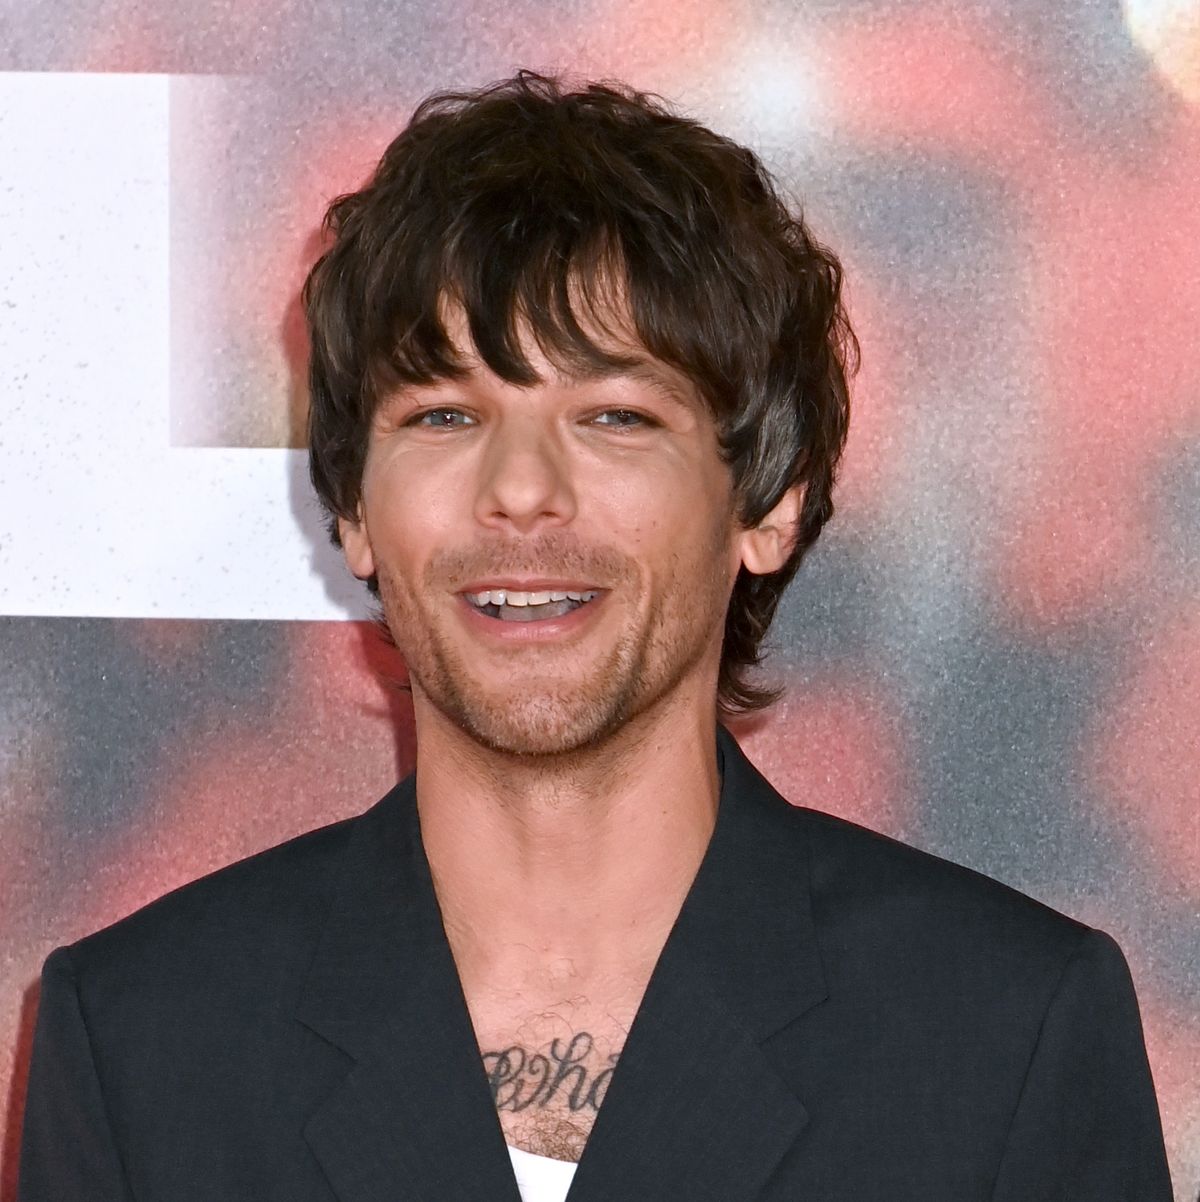 https://hips.hearstapps.com/hmg-prod/images/louis-tomlinson-arrives-at-the-all-of-those-voices-uk-news-photo-1682515799.jpg?crop=0.816xw:0.545xh;0.0750xw,0&resize=1200:*